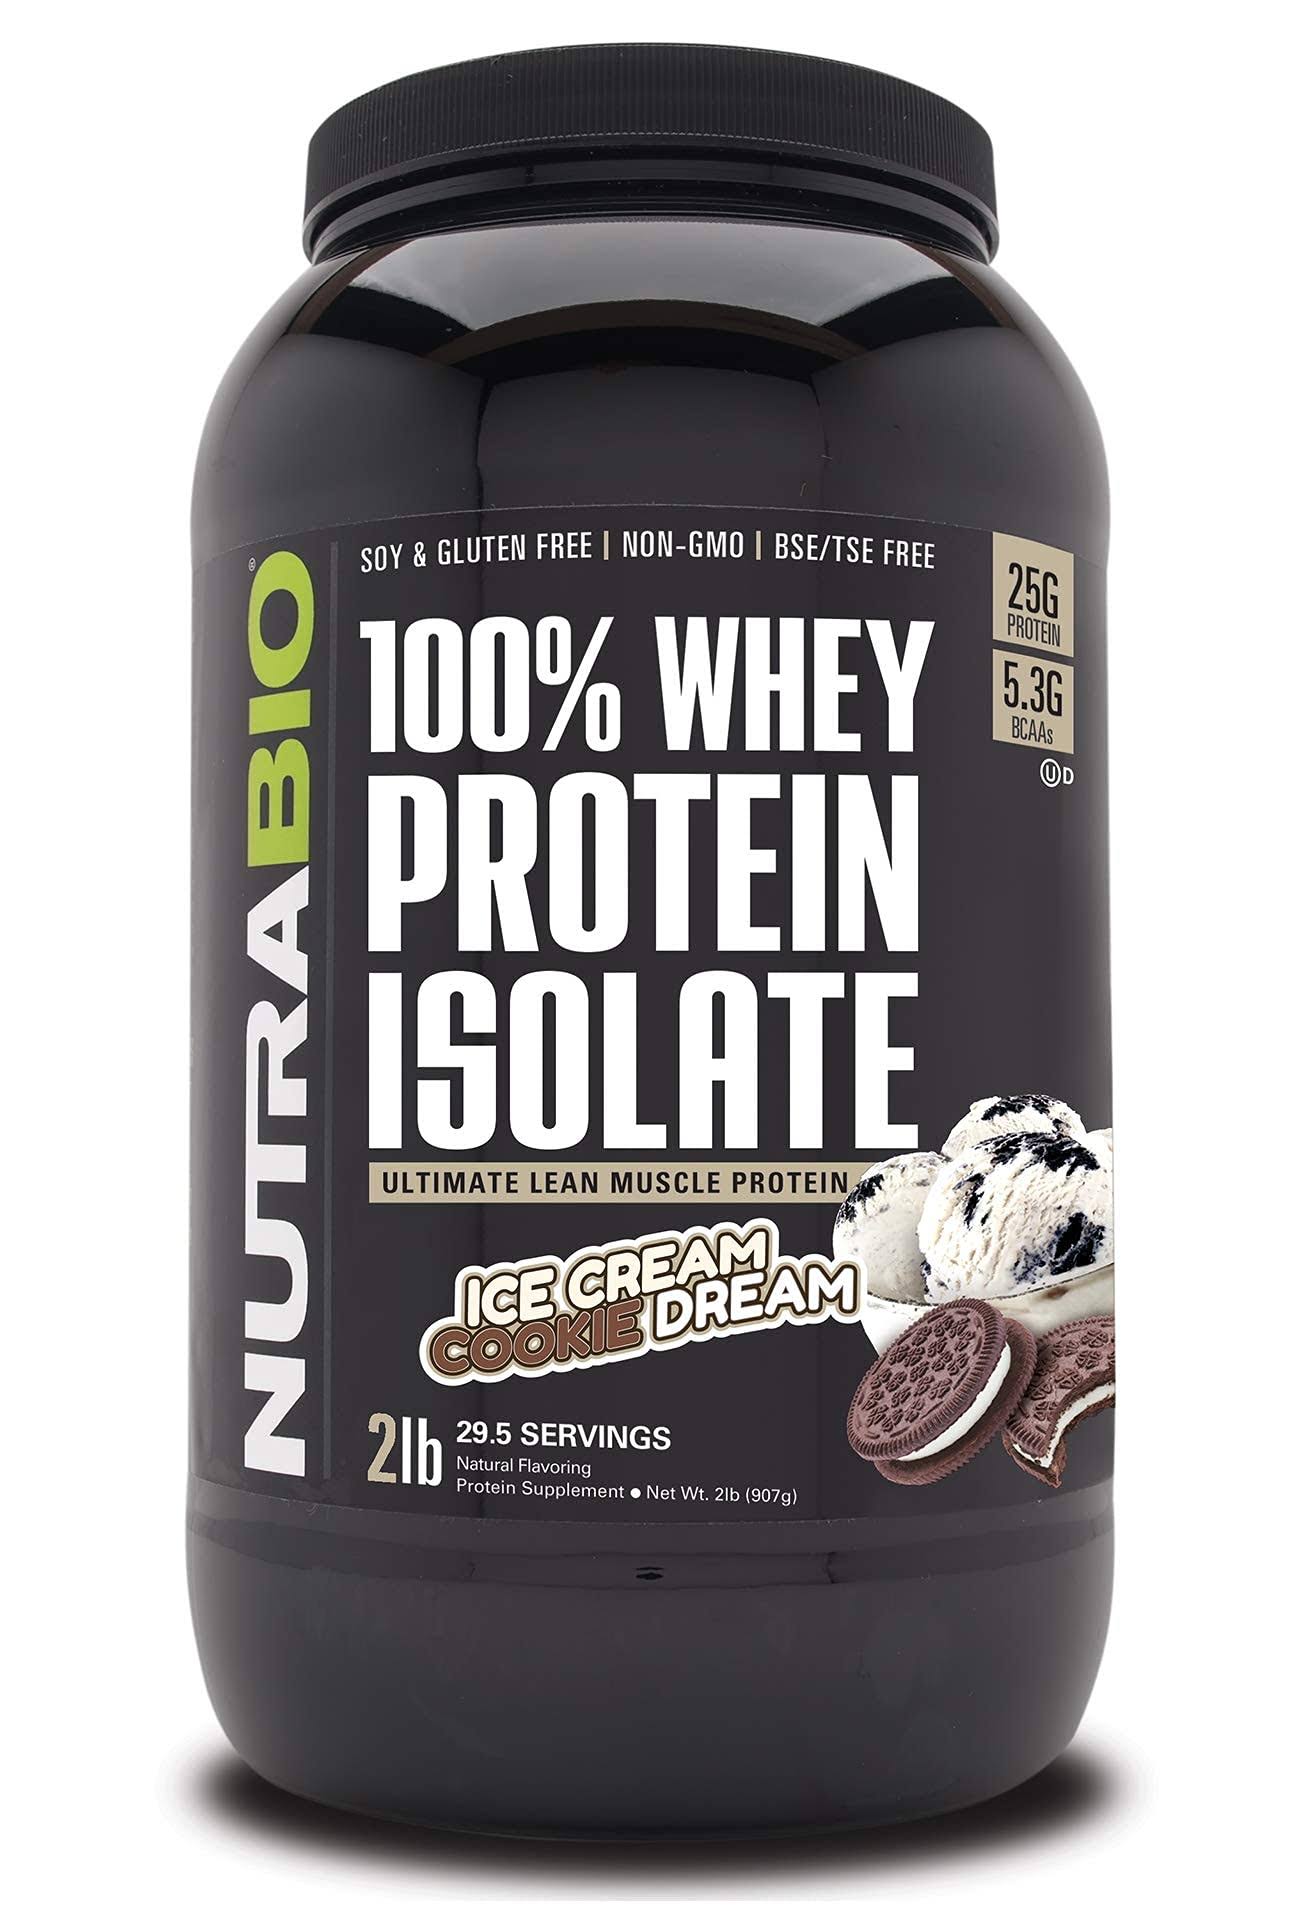 Nutrabio 100 Whey Protein Isolate Sports Supplement - Cookies and Cream, 2lb